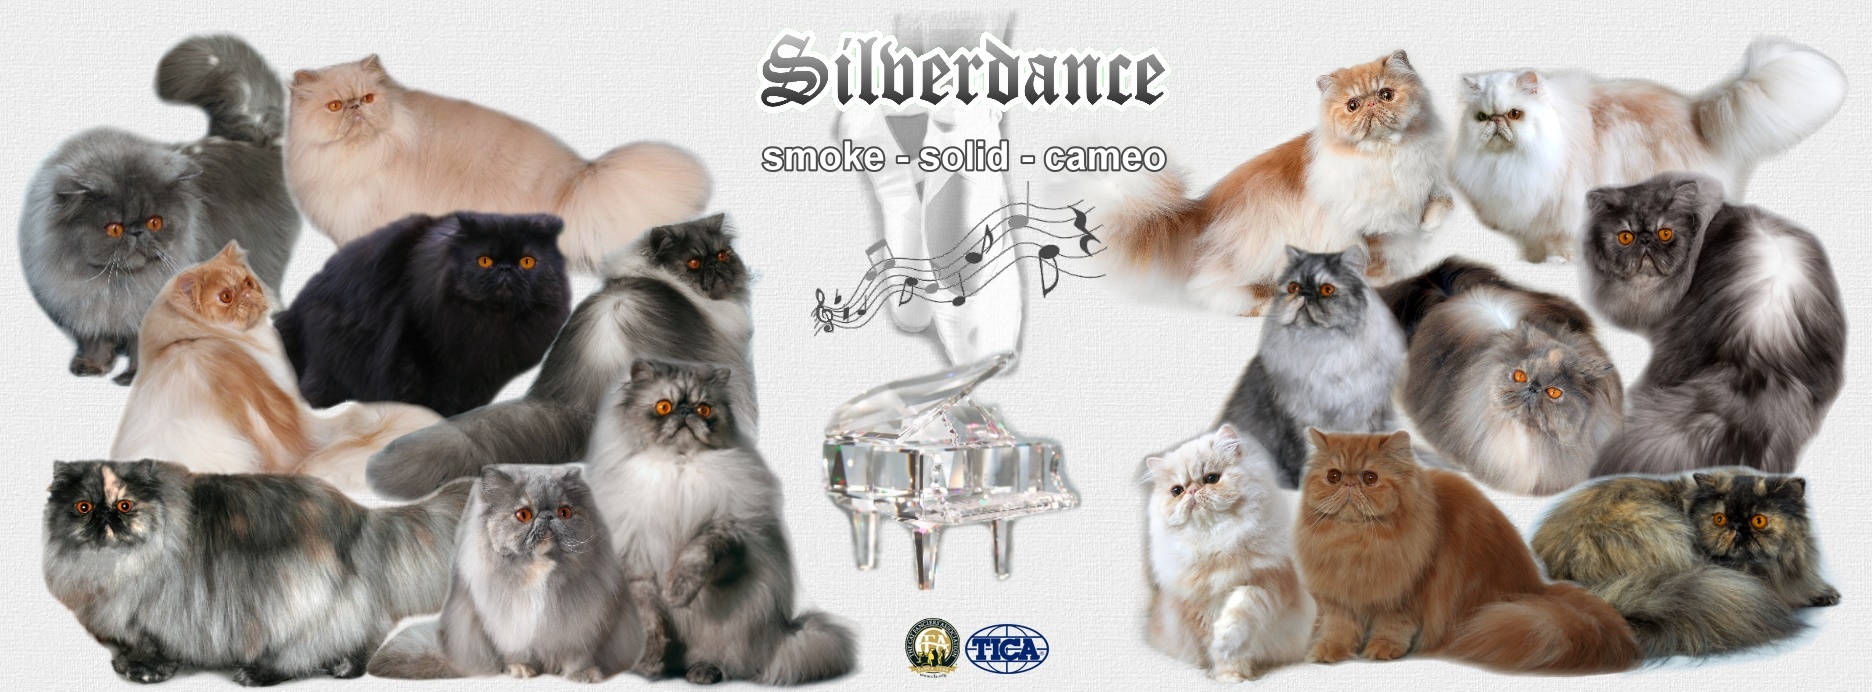 Silverdance Persians - CFA cattery for smoke persians & solid persians